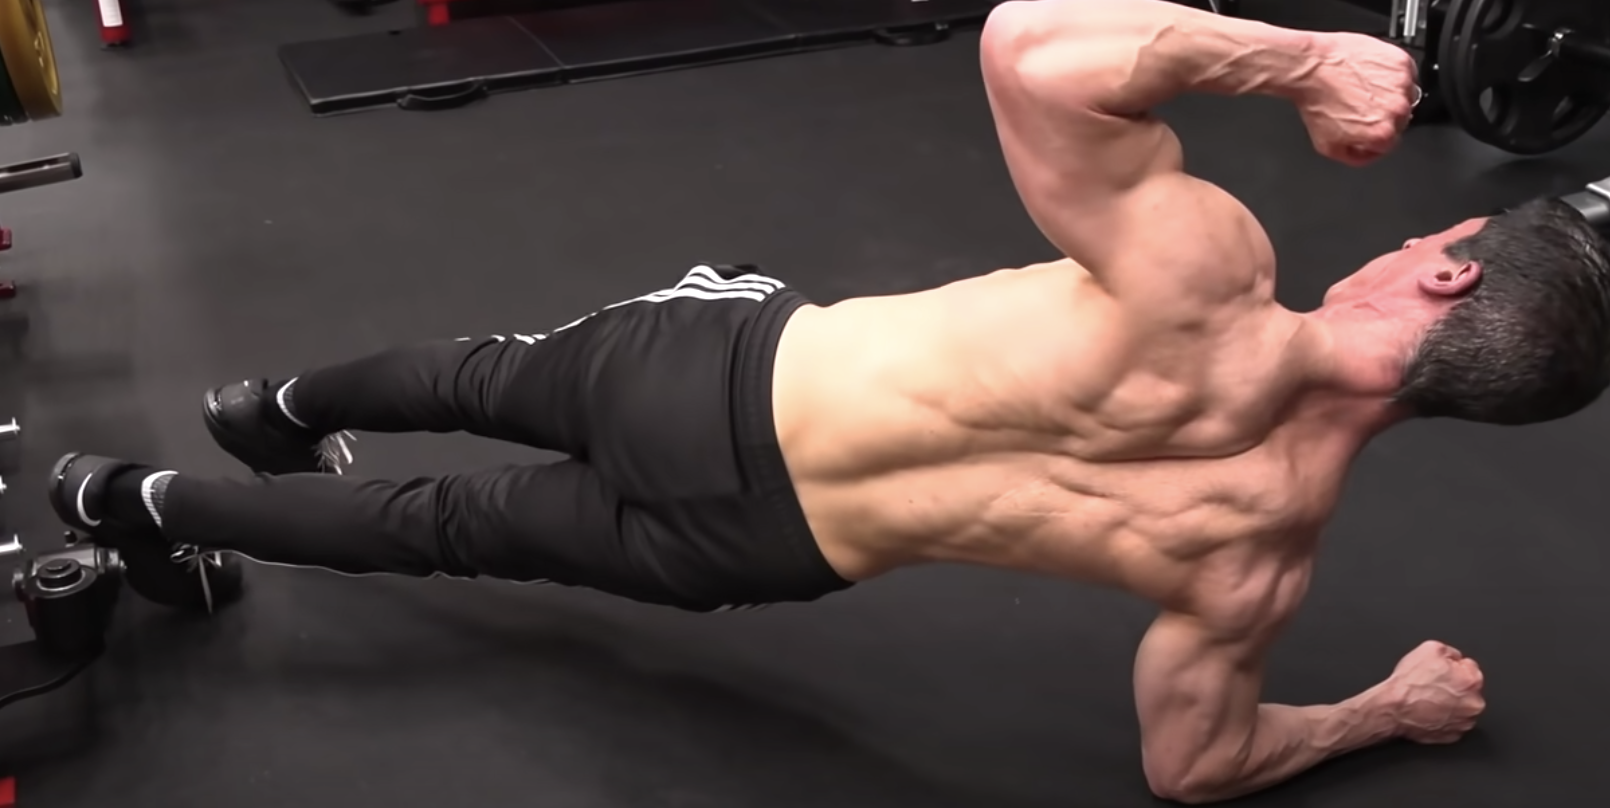 Athlean-X Shares 18 Pushup Variations to Hit Every Muscle Group